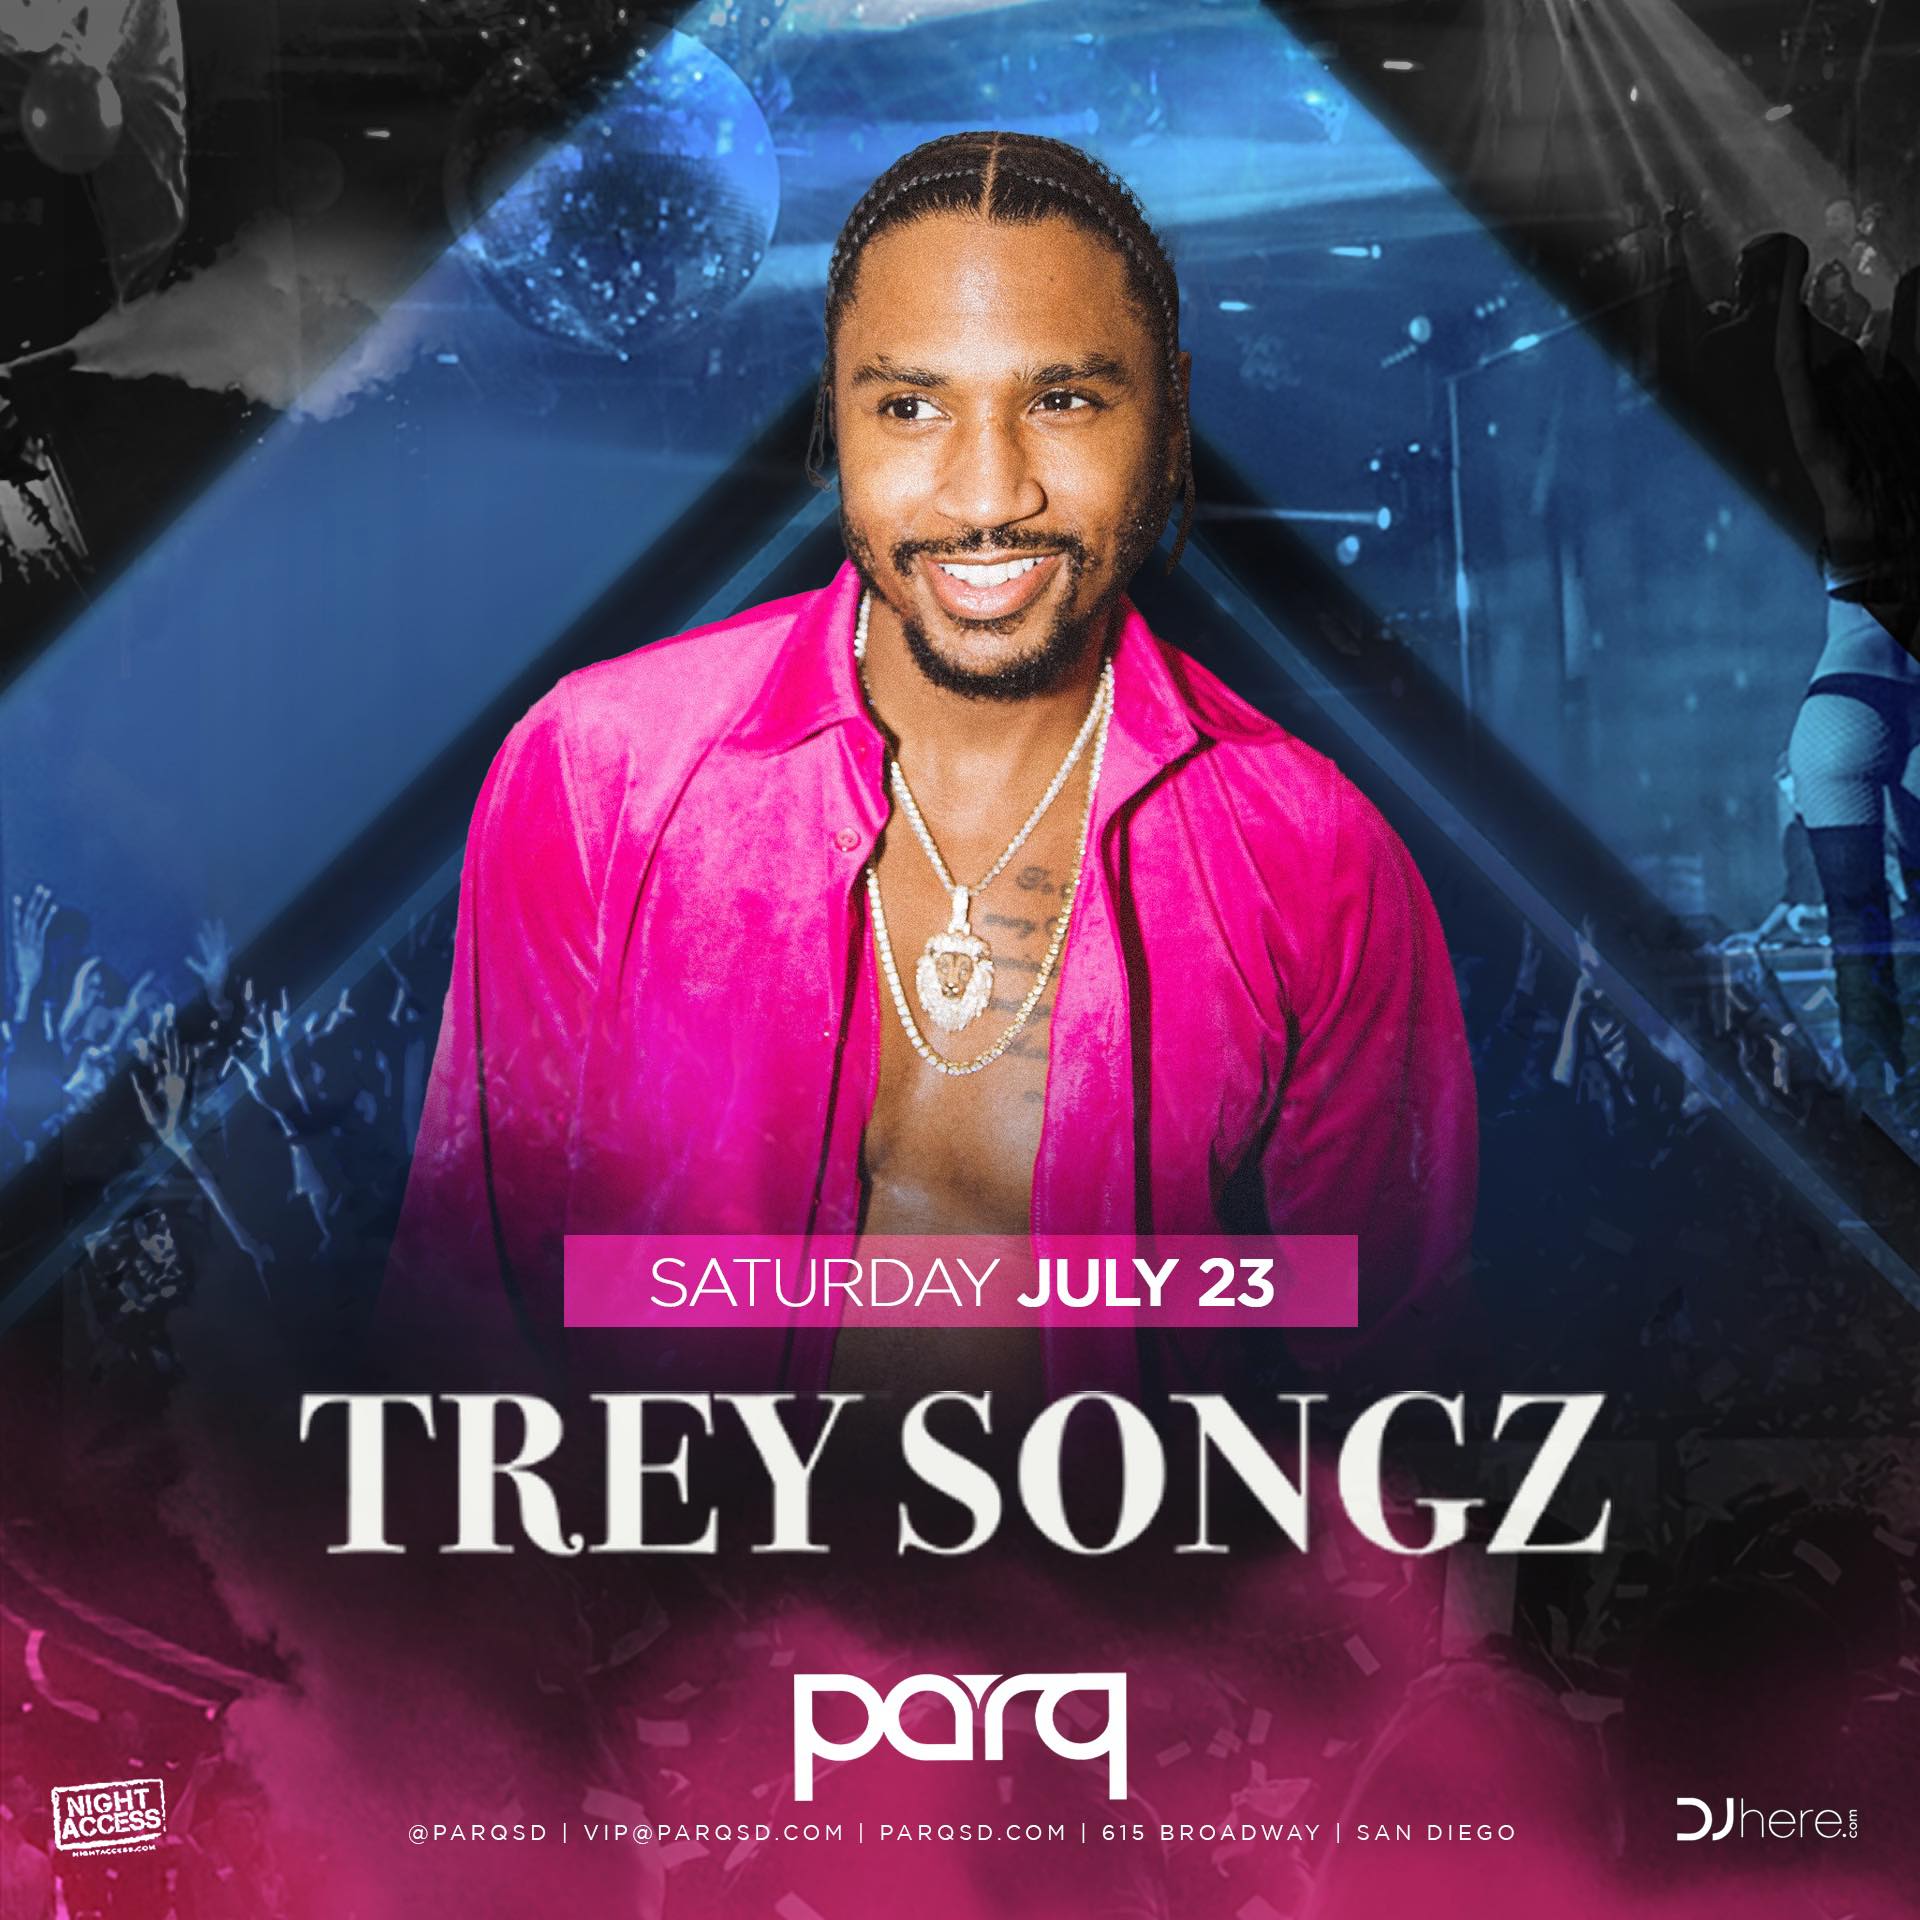 Buy Tickets to Trey Songz in San Diego on Jul 23, 2022